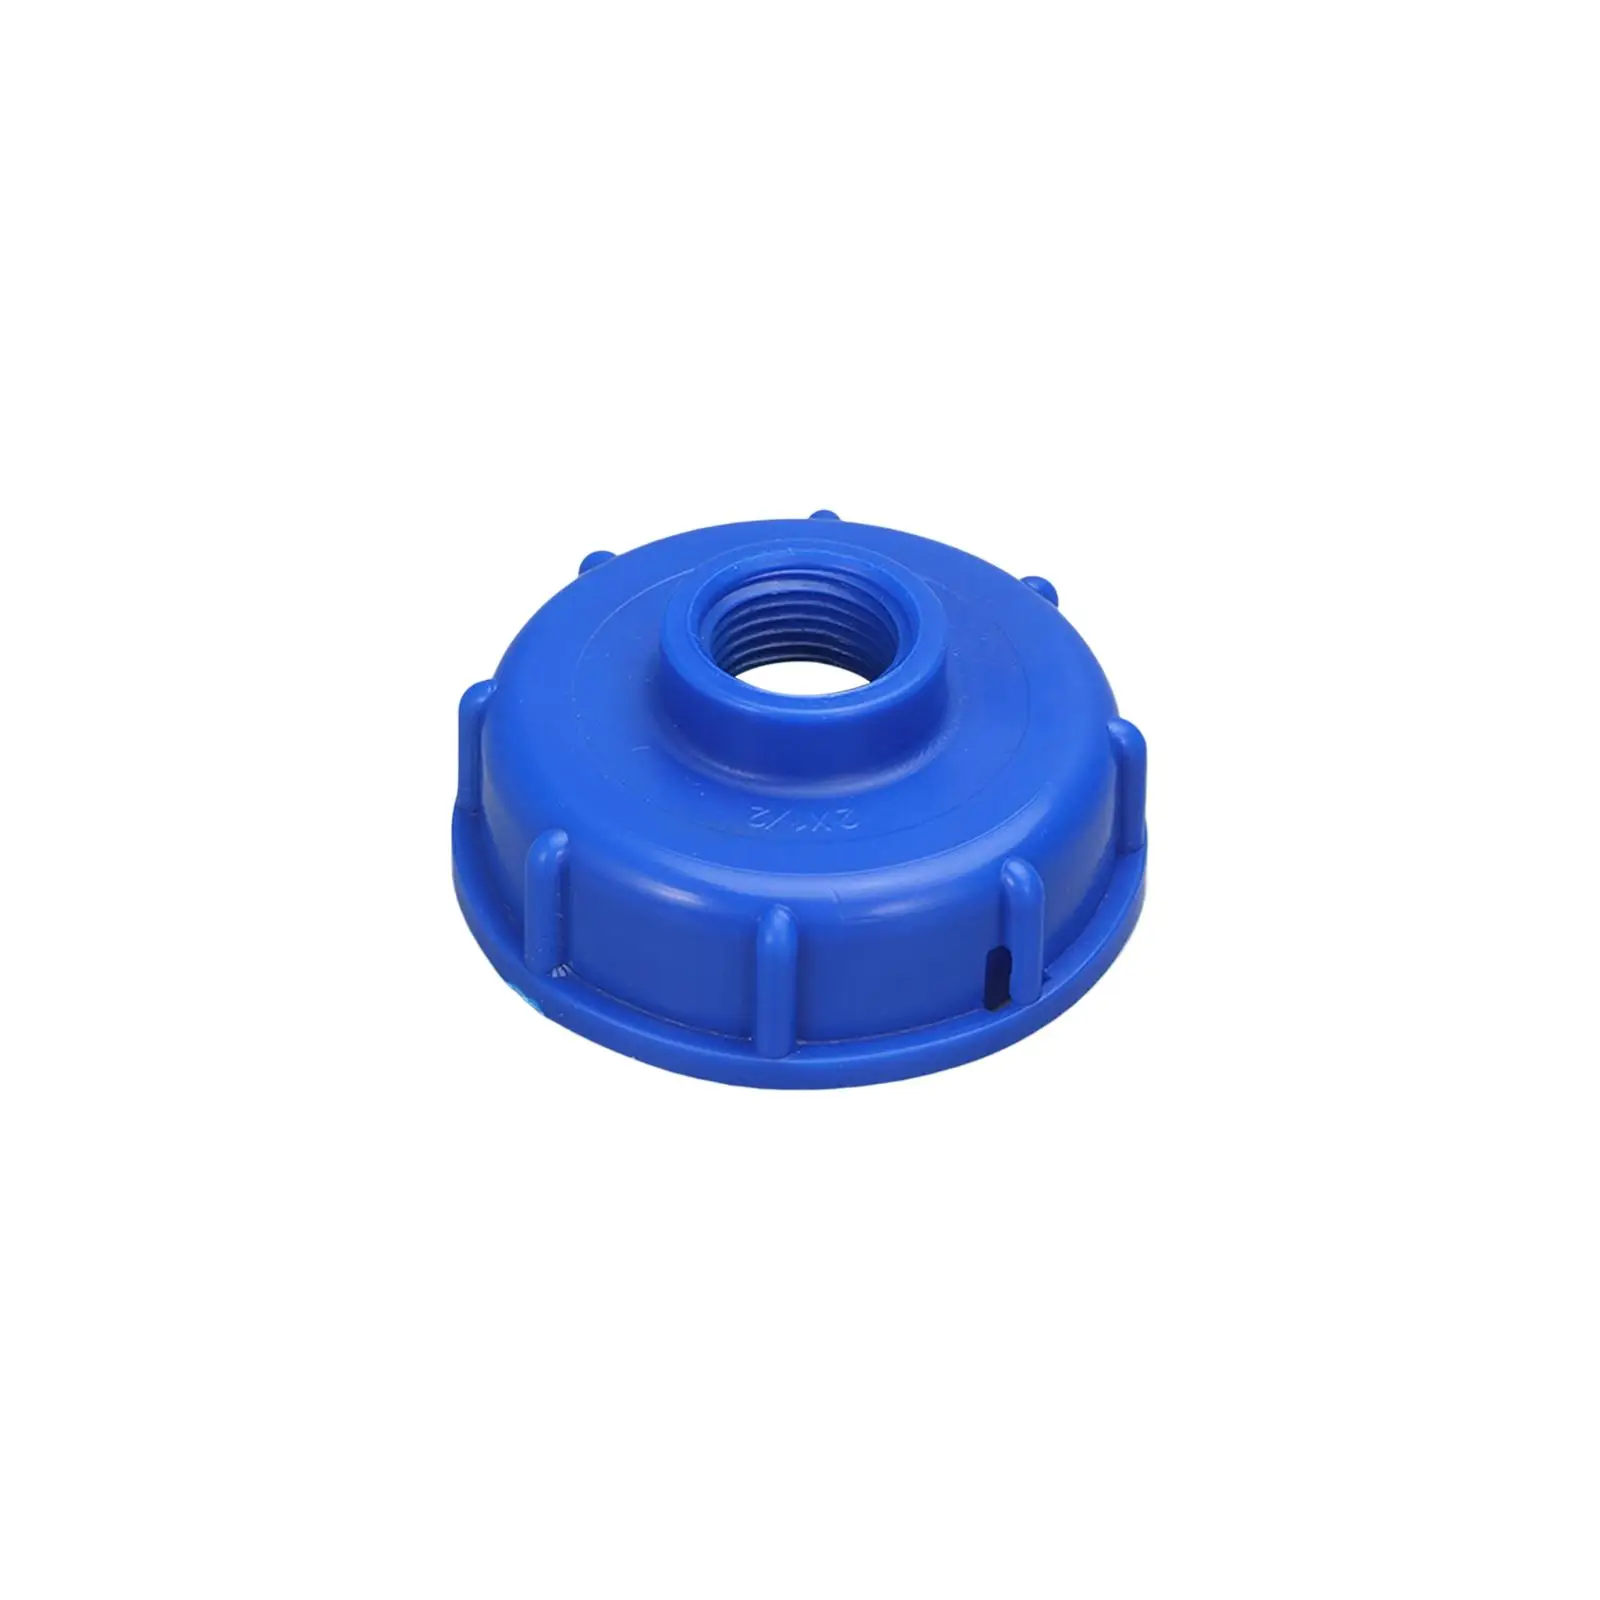 IBC Water Tank Fittings S60x6 Thread Garden Hose Connector for Water Tank Greenhouse Garden Watering Equipment Faucet Parts